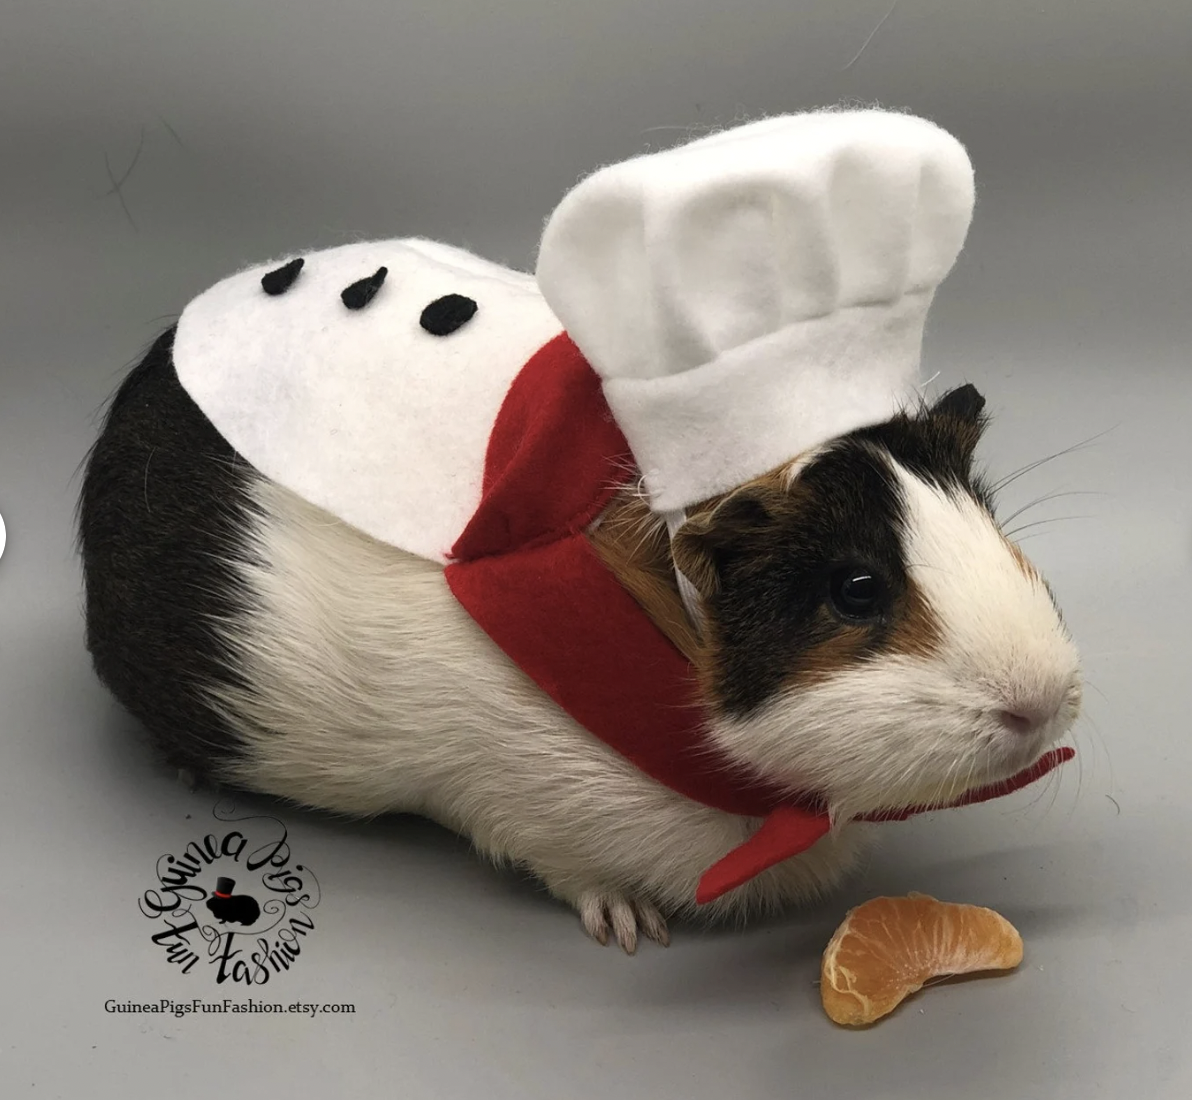 Black and white guinea pig in a tiny chef hat and cape designed to look like chef apron